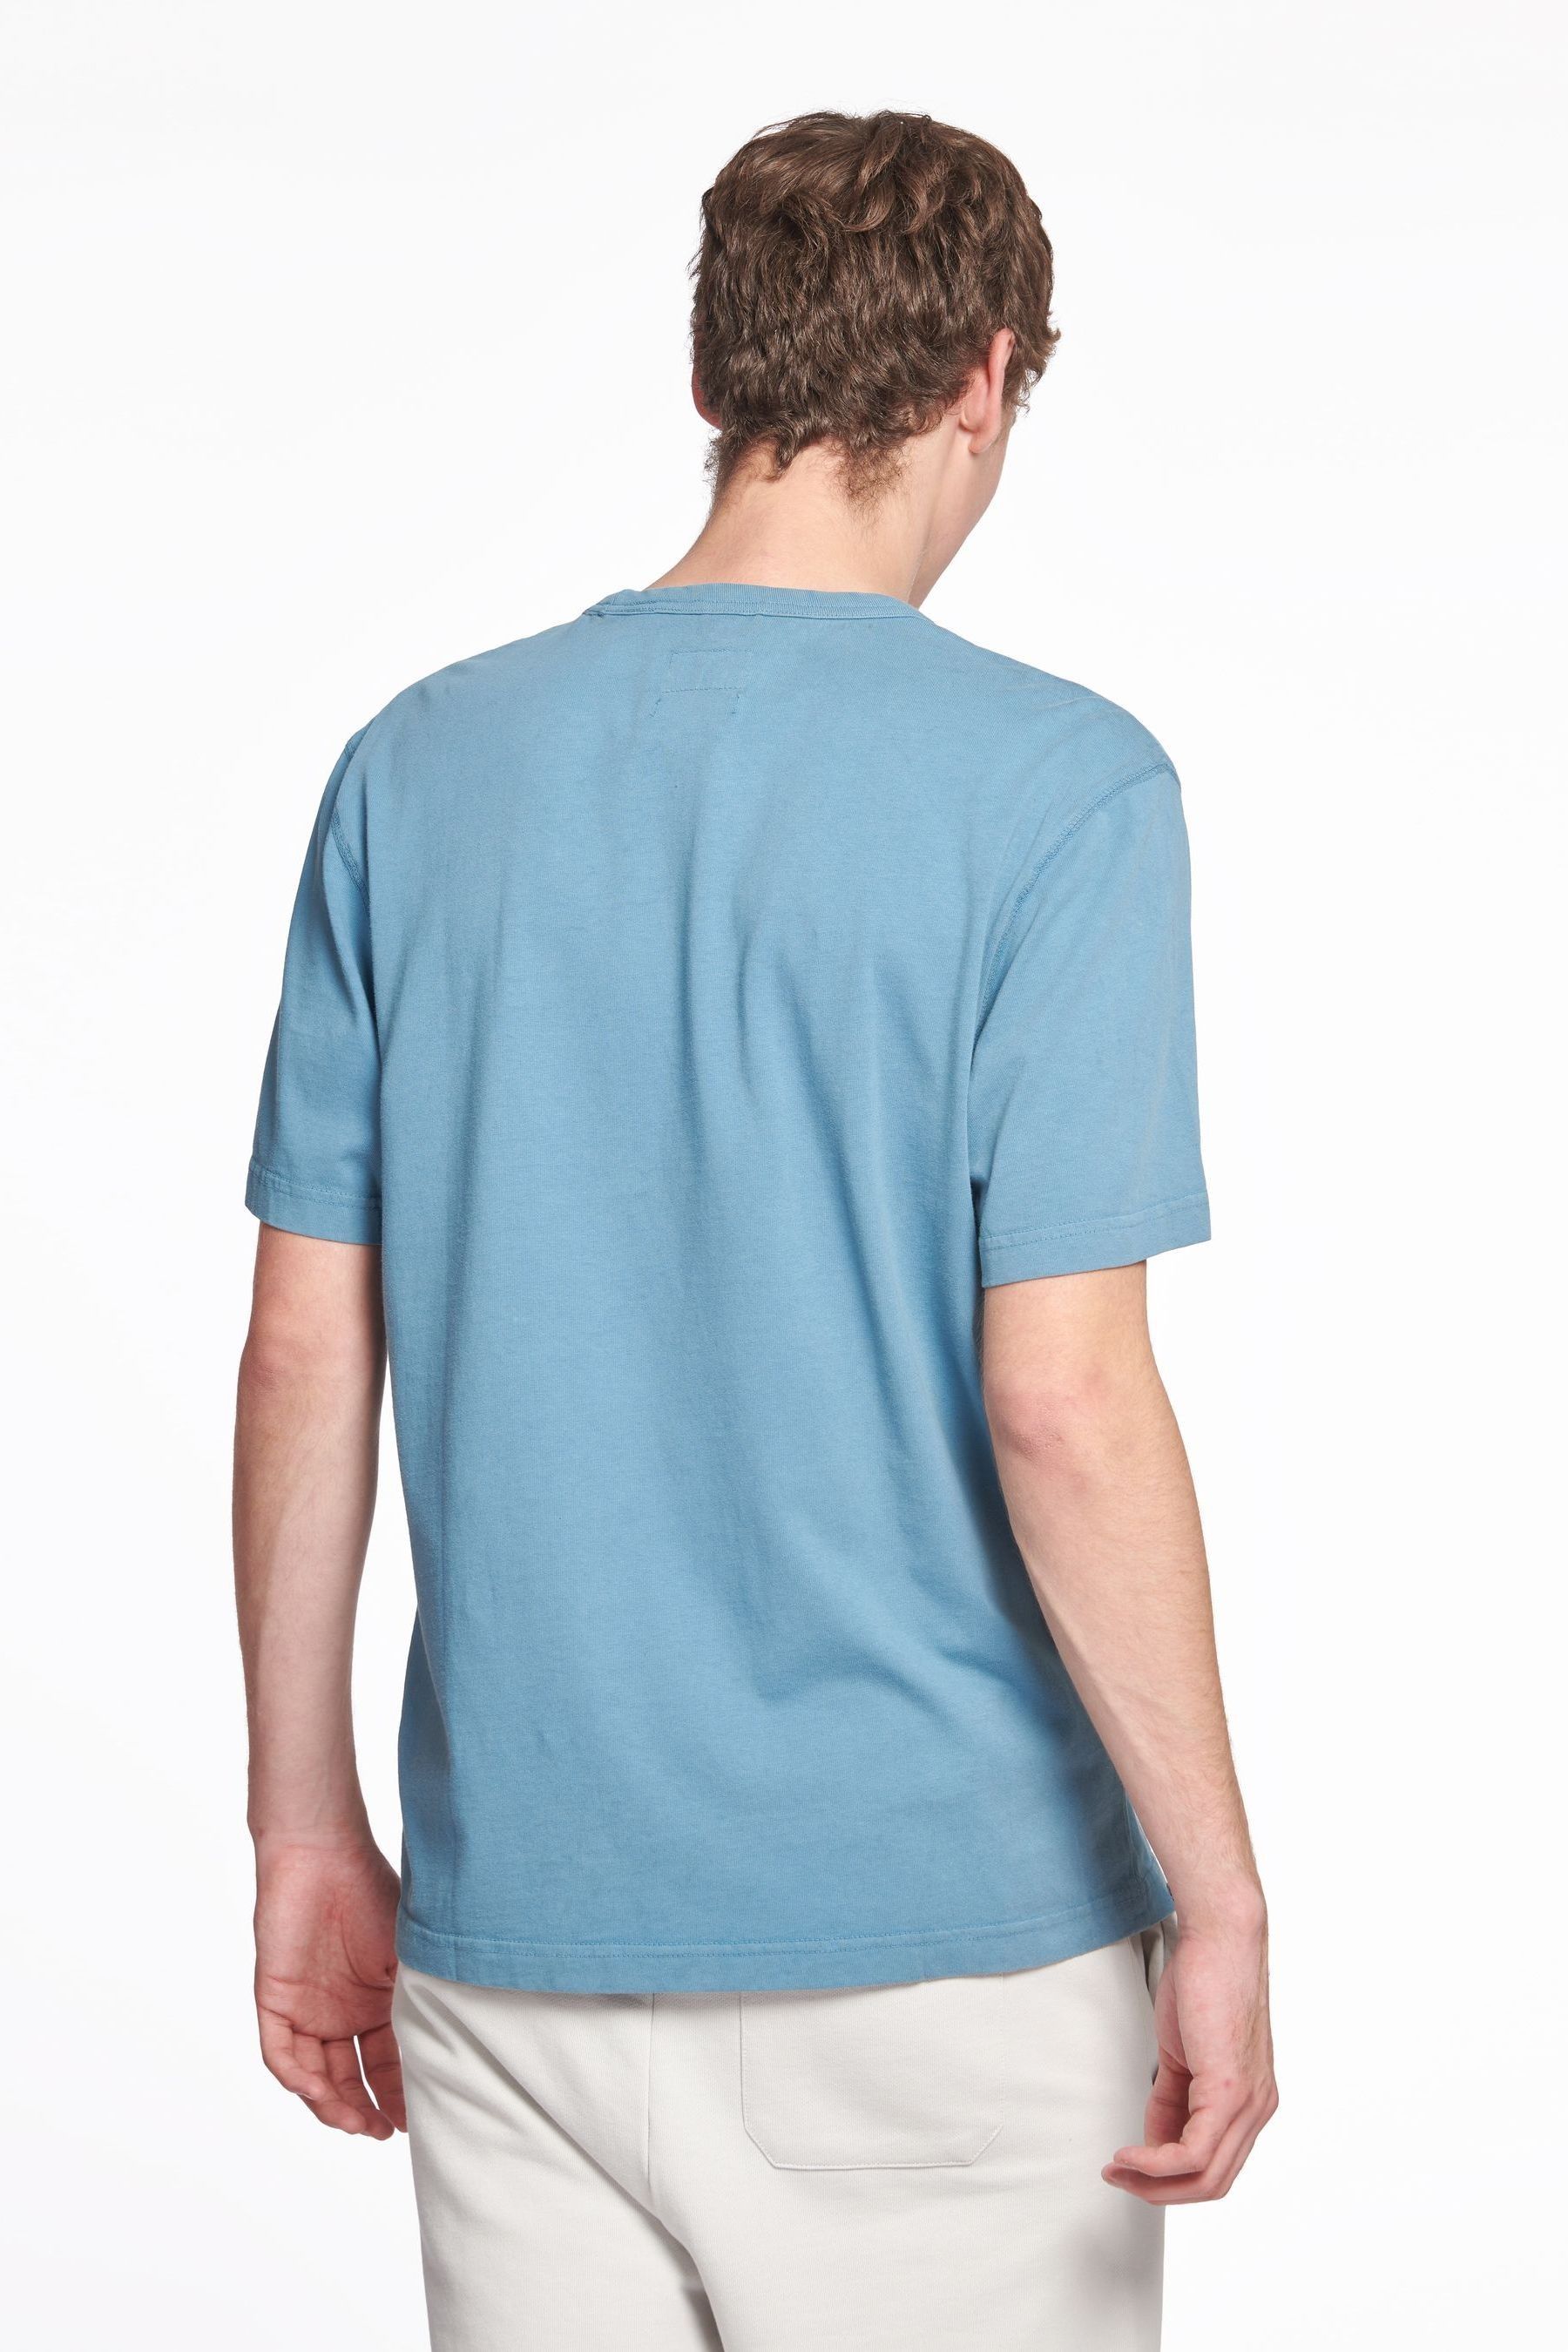 Buy Penfield Blue Garment Dyed T-Shirt from the Next UK online shop